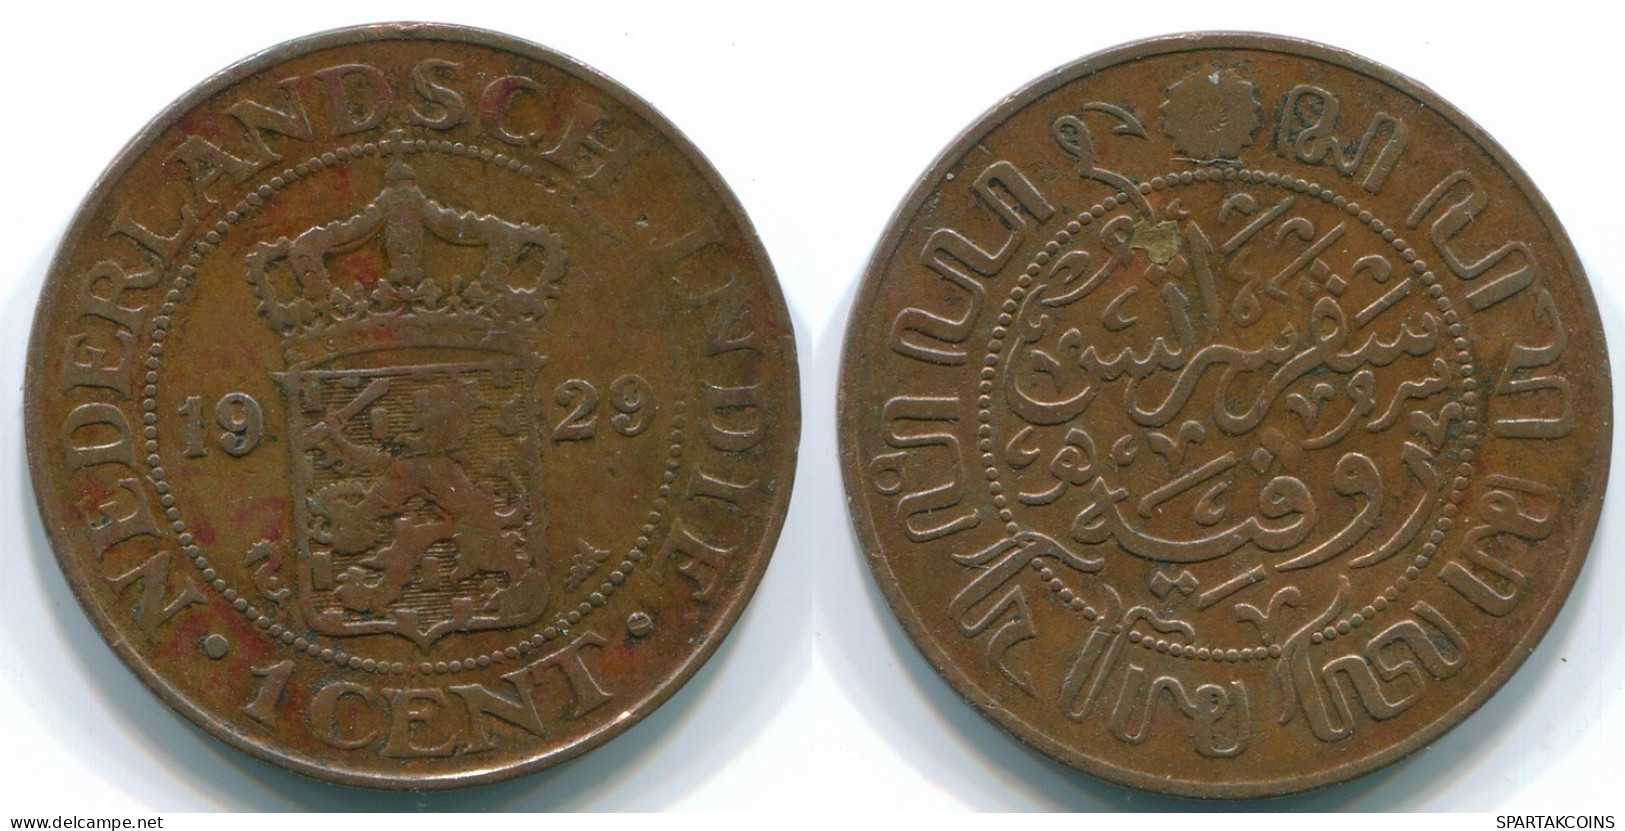 1 CENT 1929 NETHERLANDS EAST INDIES INDONESIA Copper Colonial Coin #S10110.U.A - Indes Neerlandesas